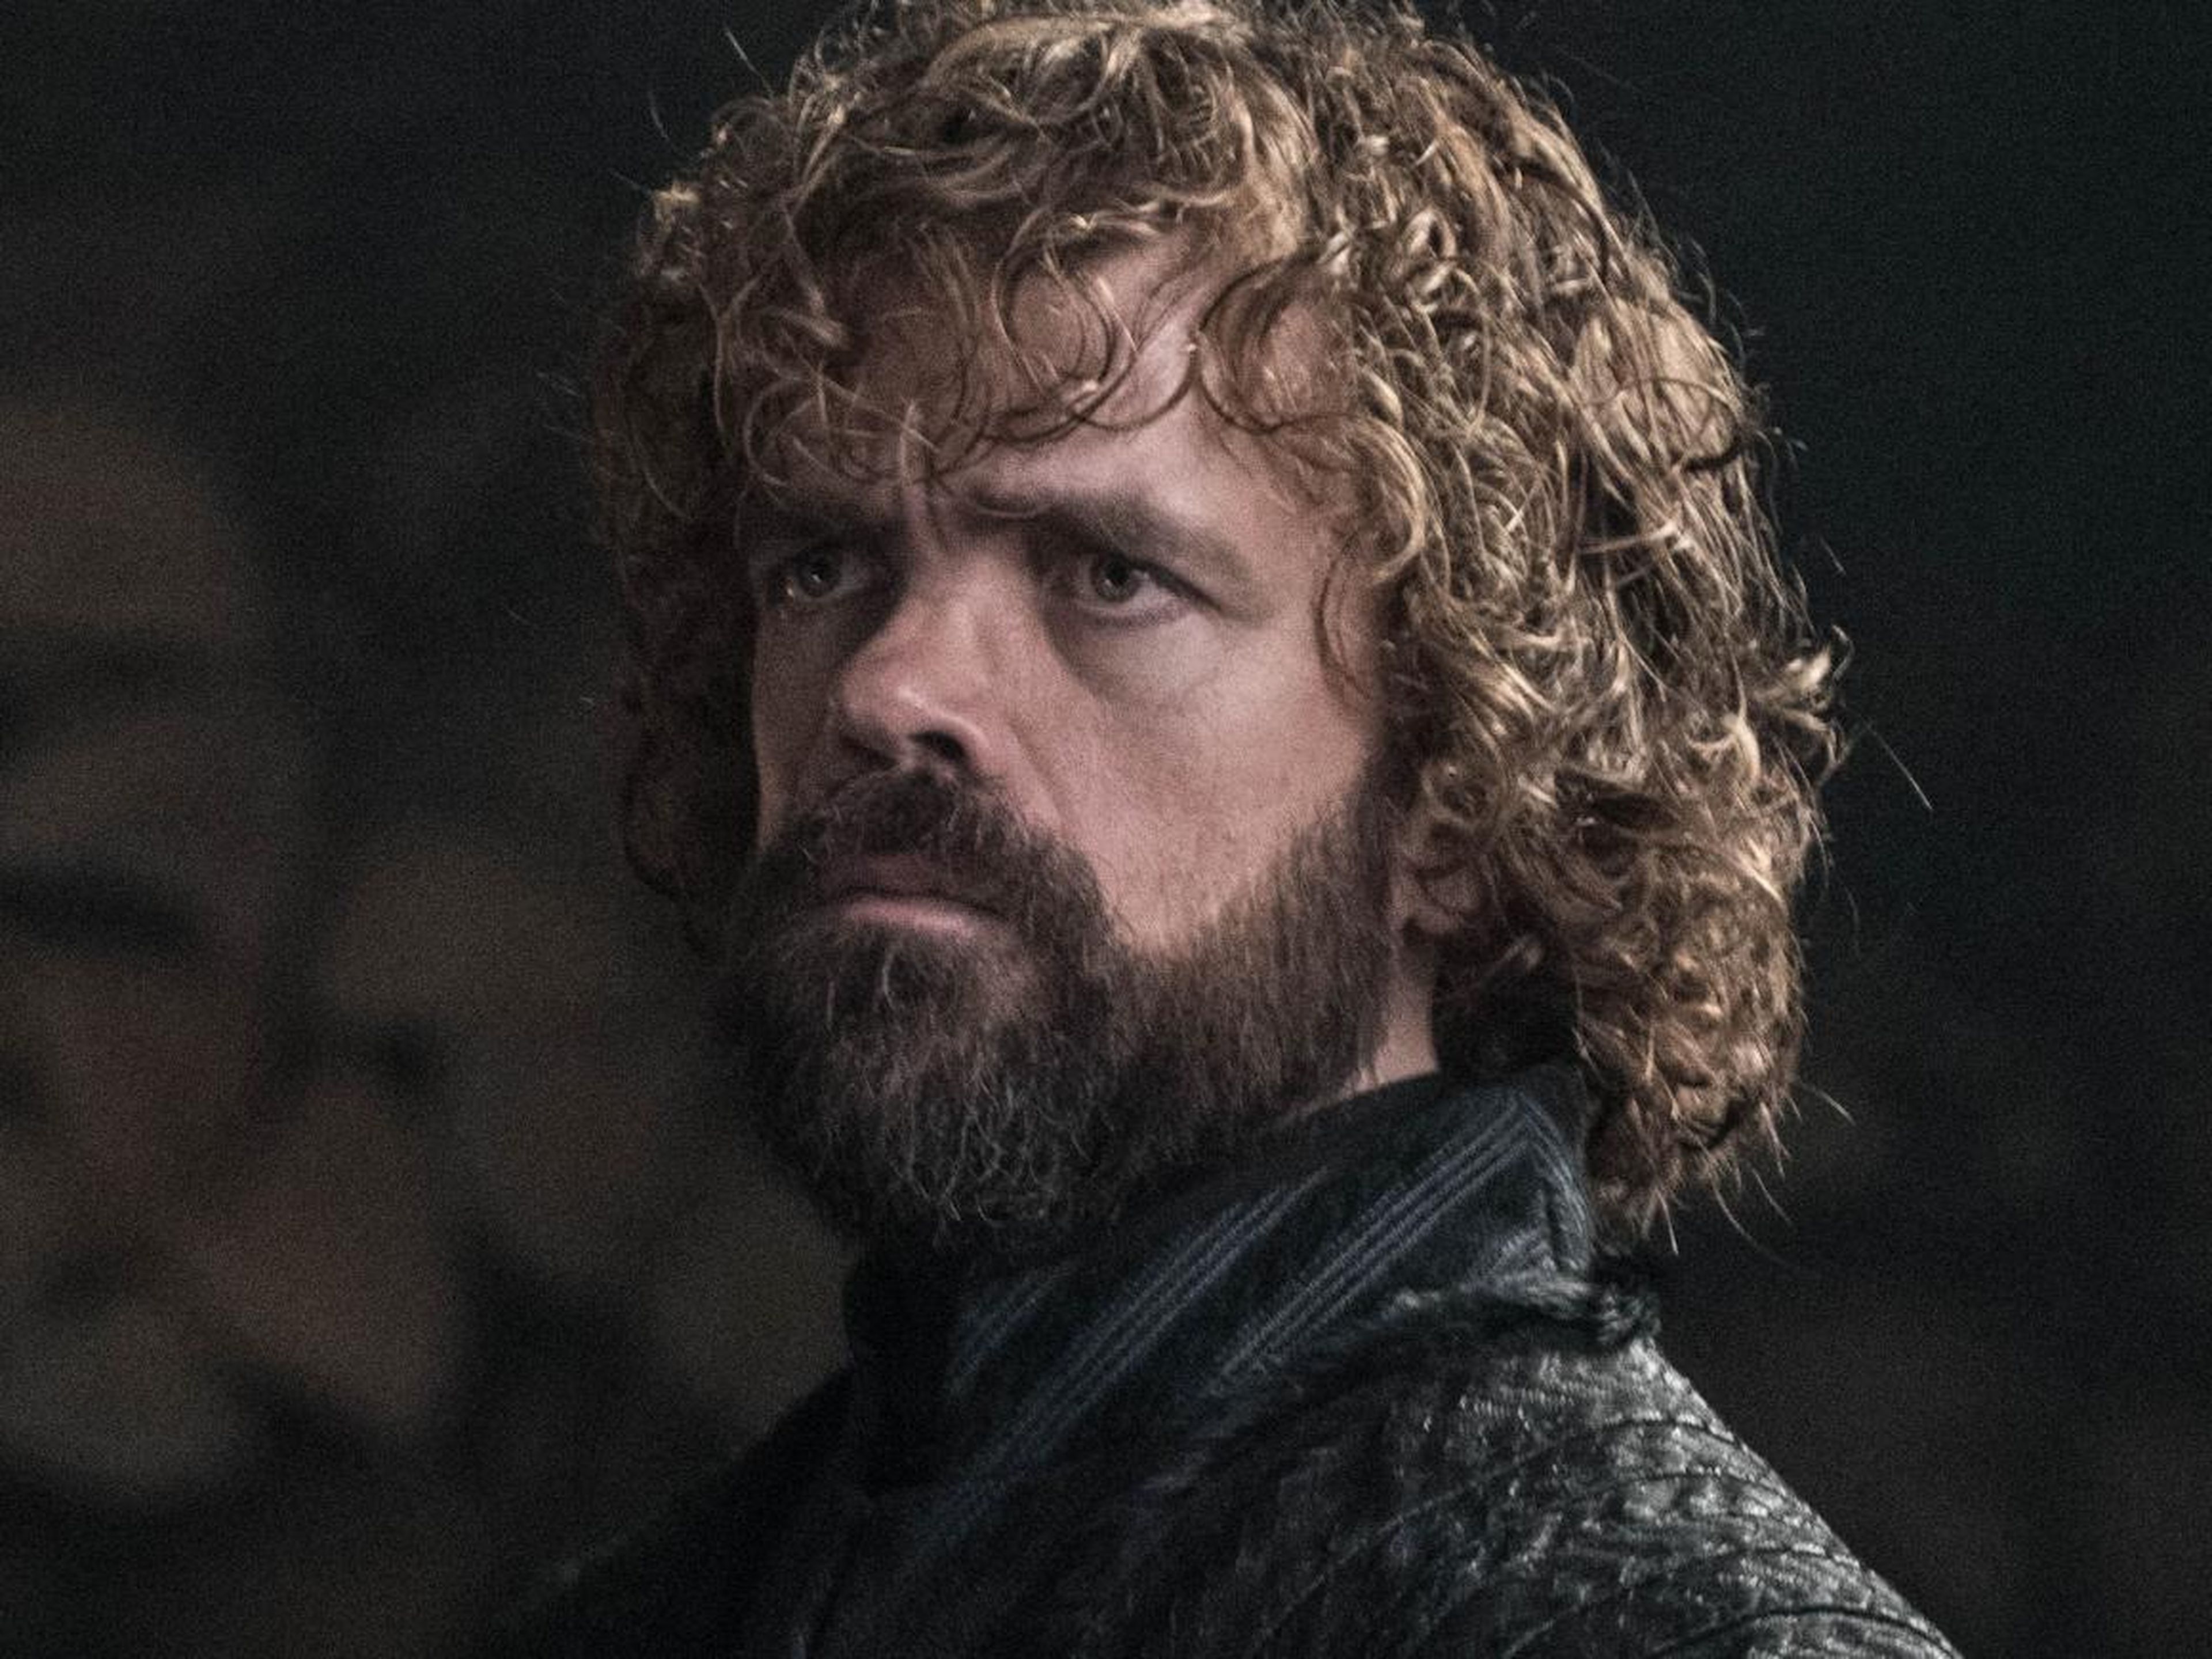 Peter Dinklage played Tyrion Lannister on "Game of Thrones."